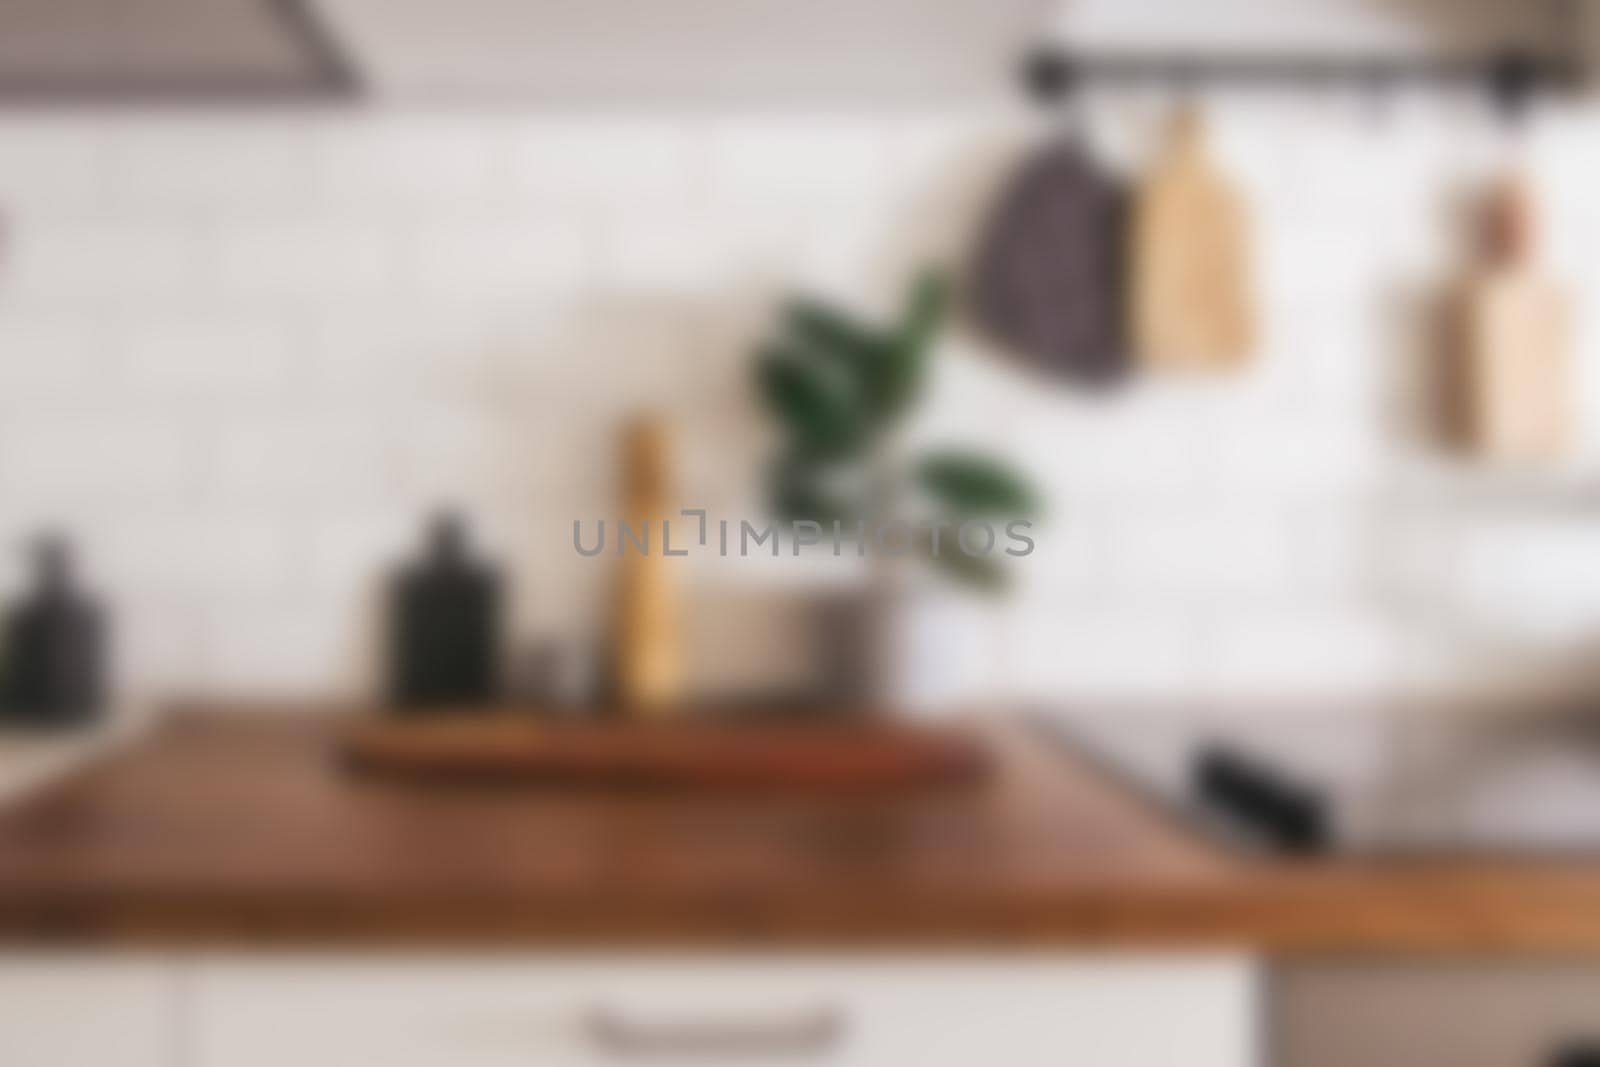 Kitchen brass utensils, chef accessories - blurred kitchen background . Hanging kitchen with white tiles wall and wood tabletop.Green plant on kitchen background side view